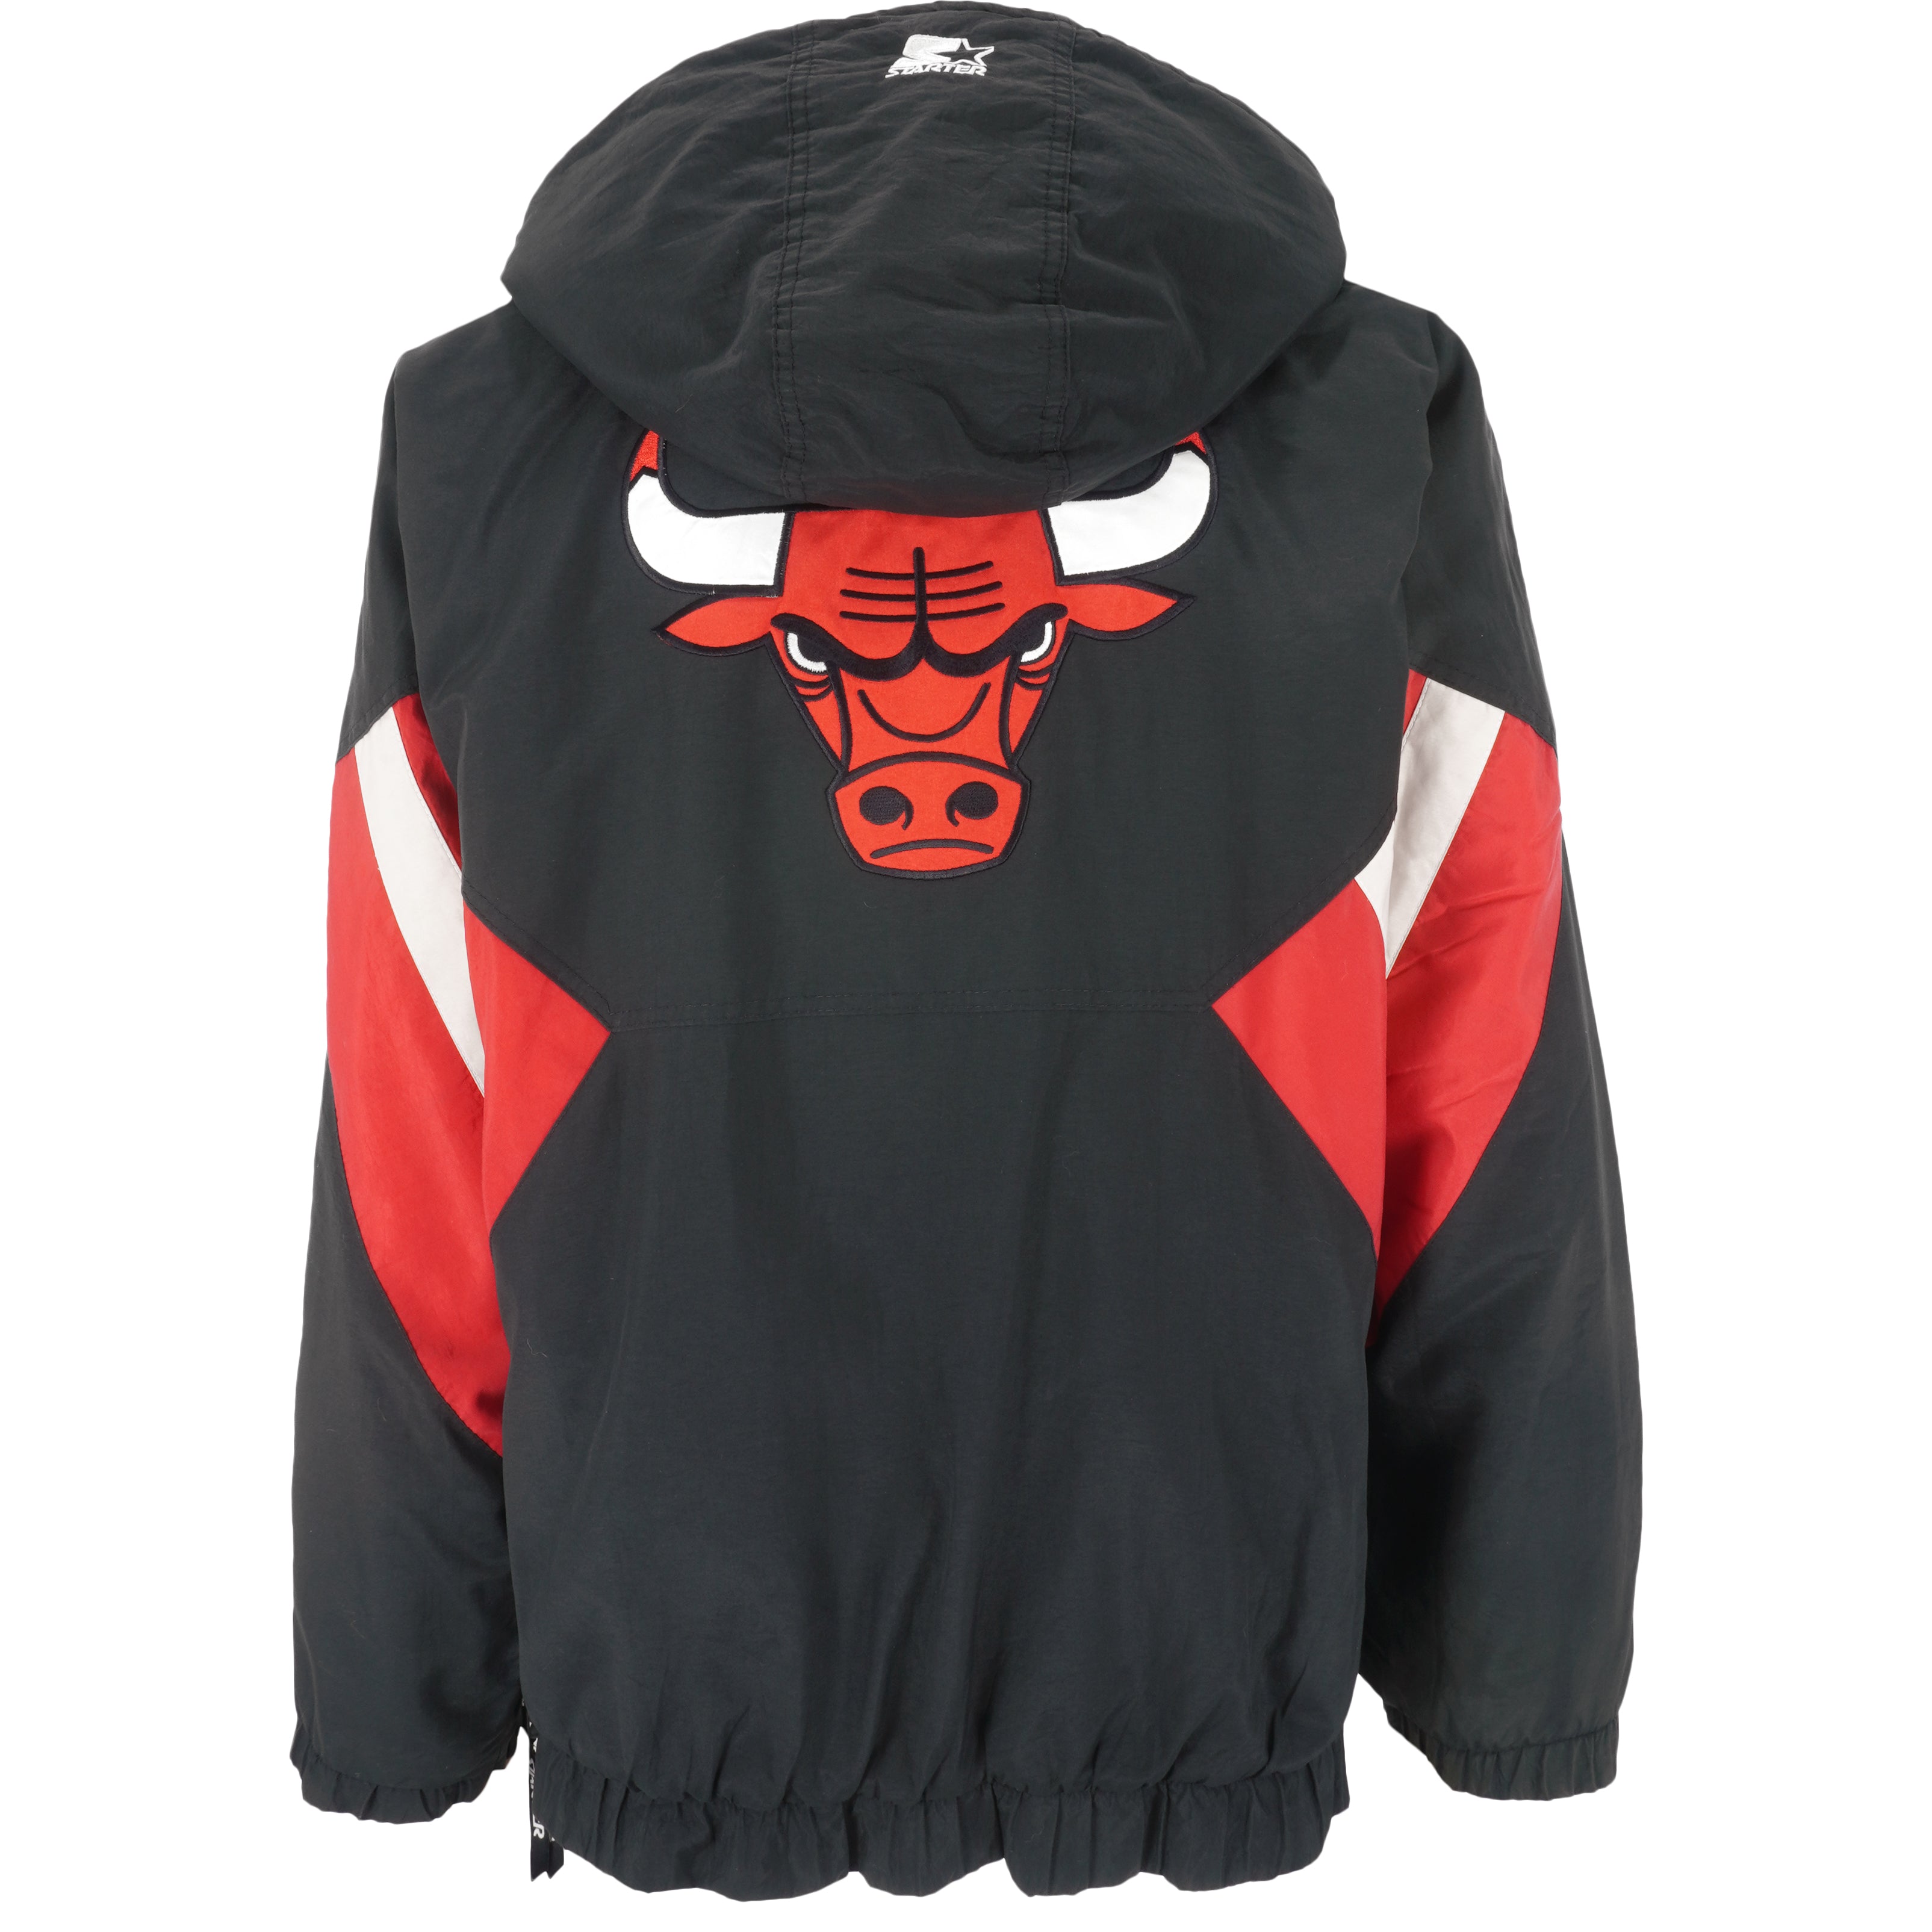 Chicago Bulls Clothing - Buy Chicago Bulls Clothing online in India